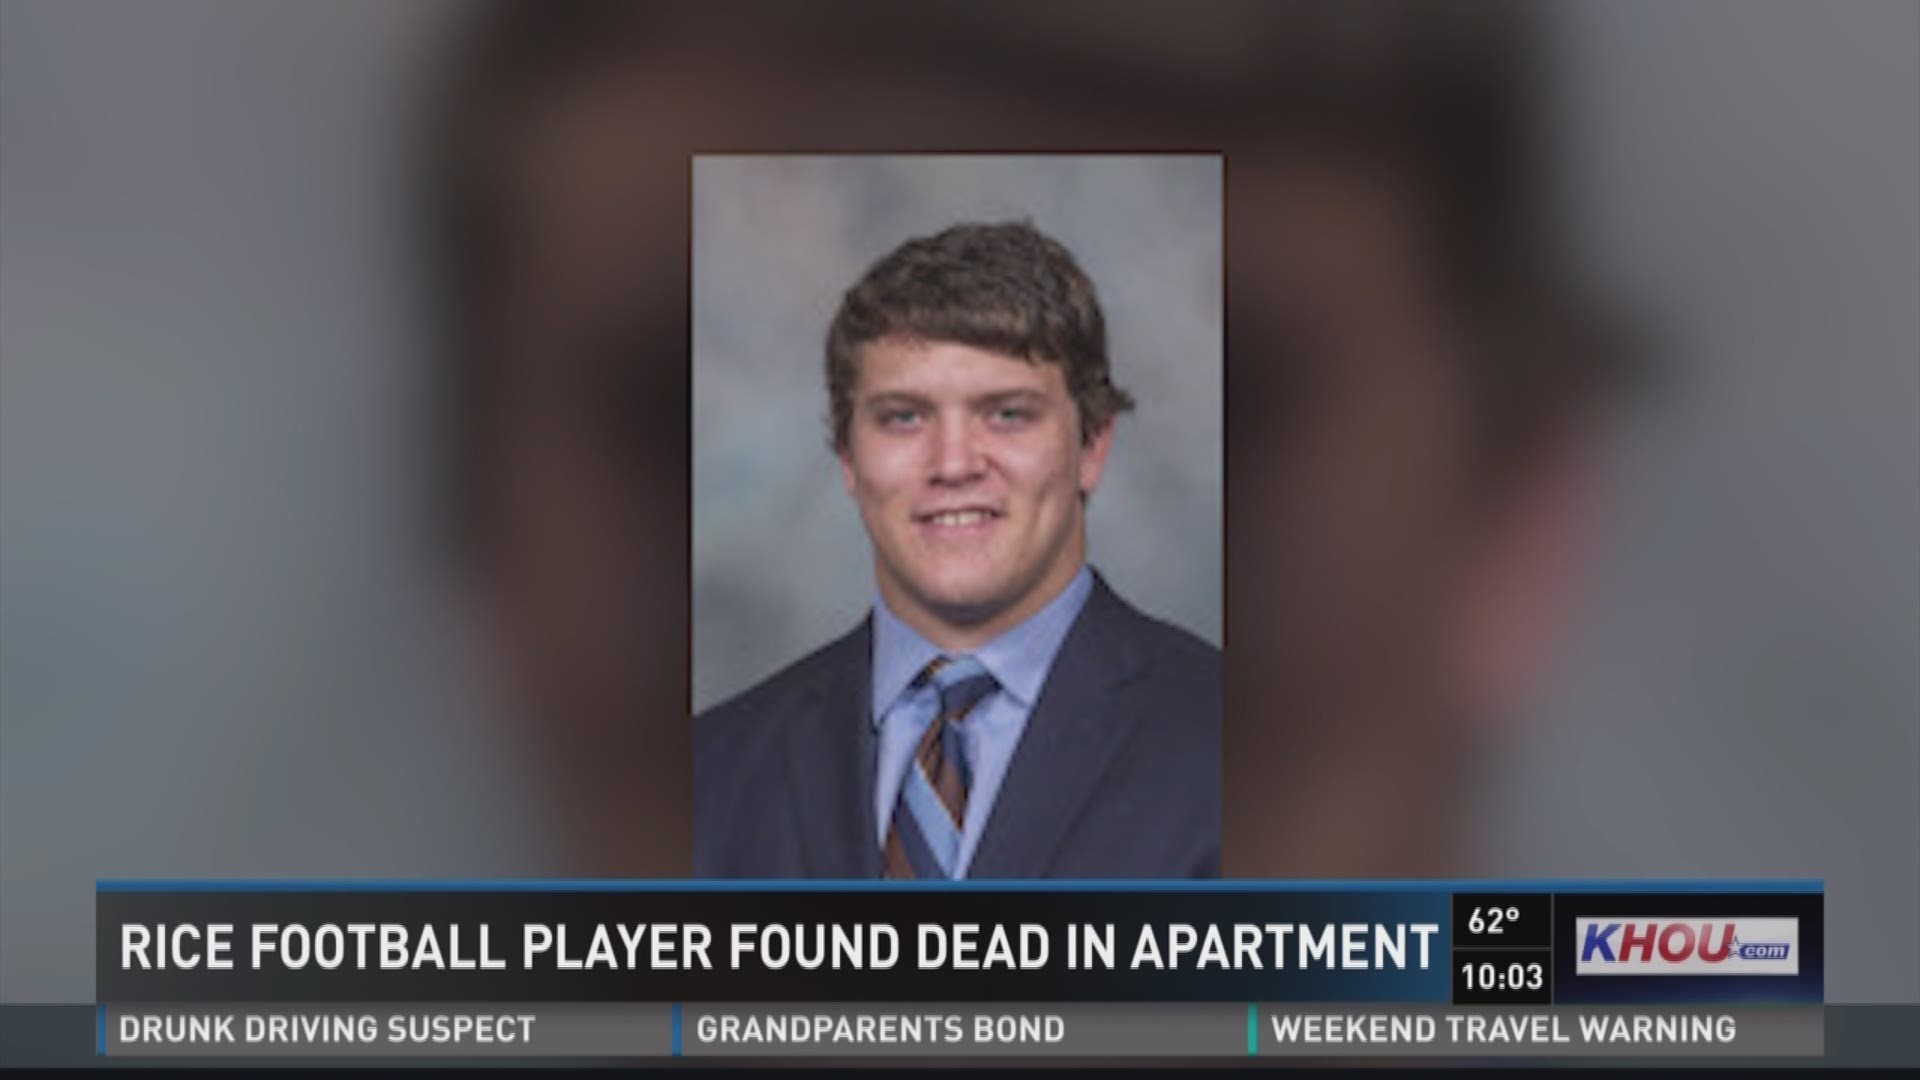 Rice University has confirmed one of their student athletes was found dead inside his apartment on Friday.